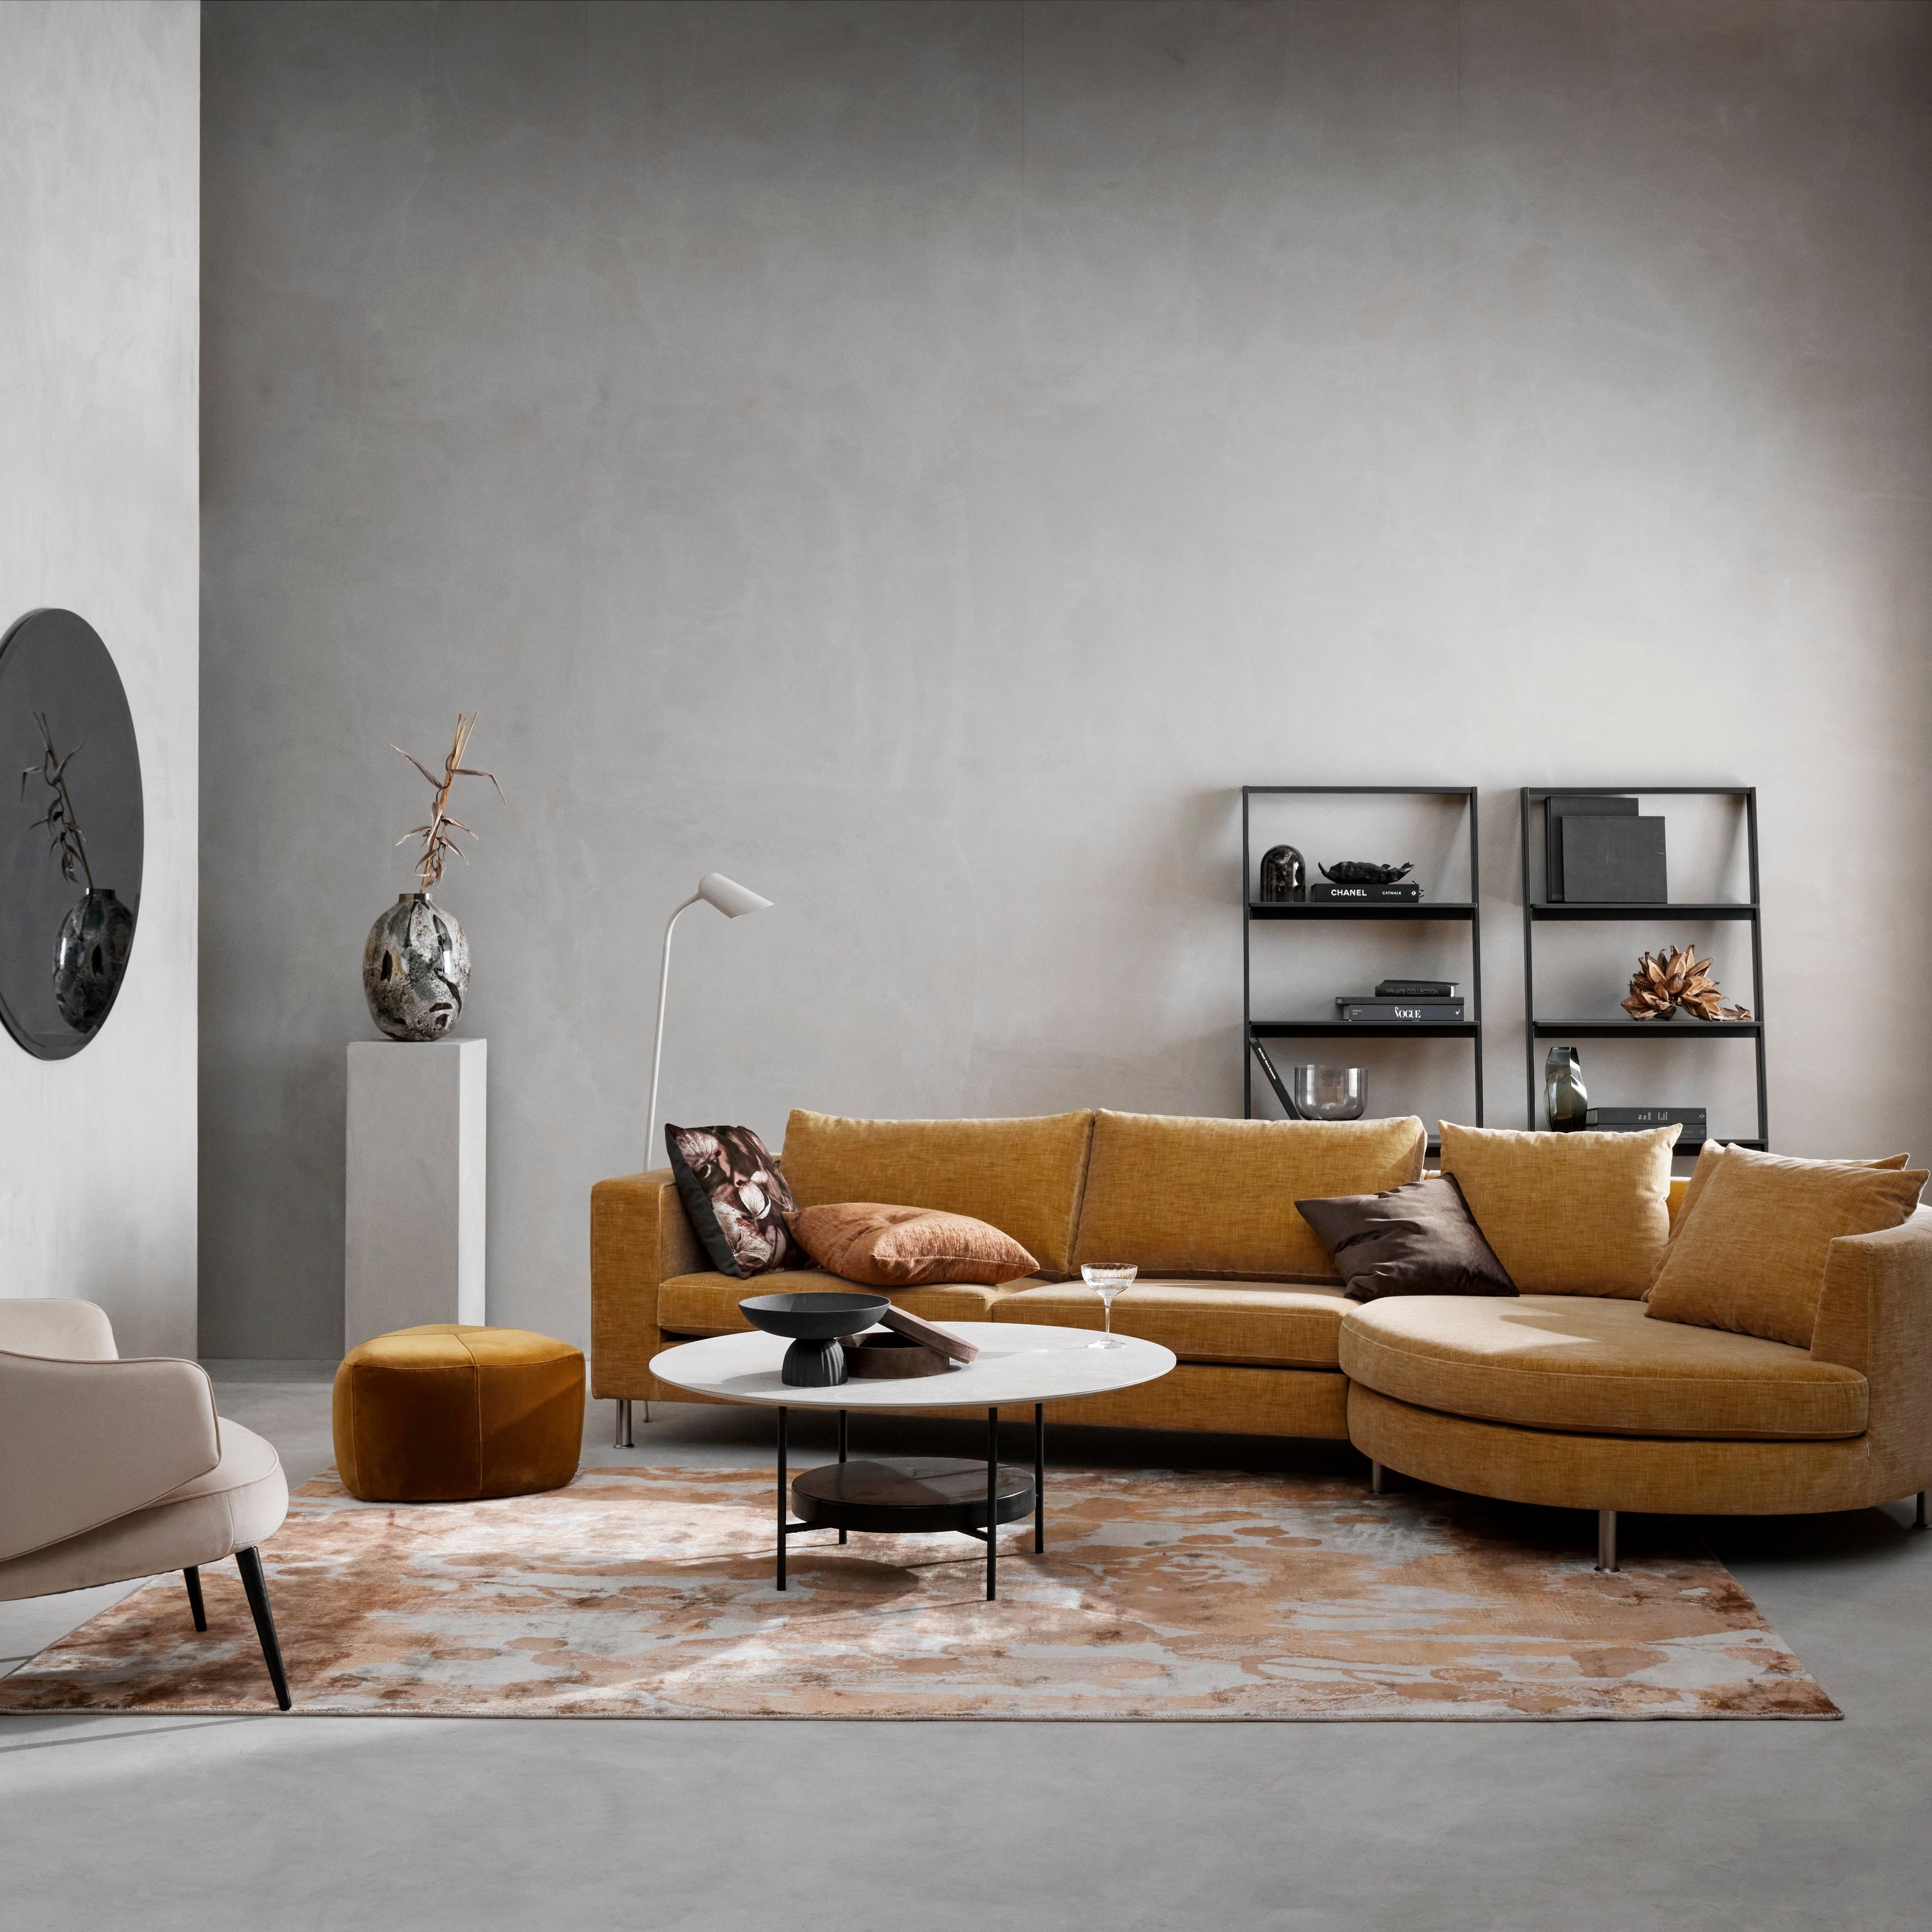 Modern living room with a mustard sectional sofa, beige chair, patterned rug, and minimalist decor.